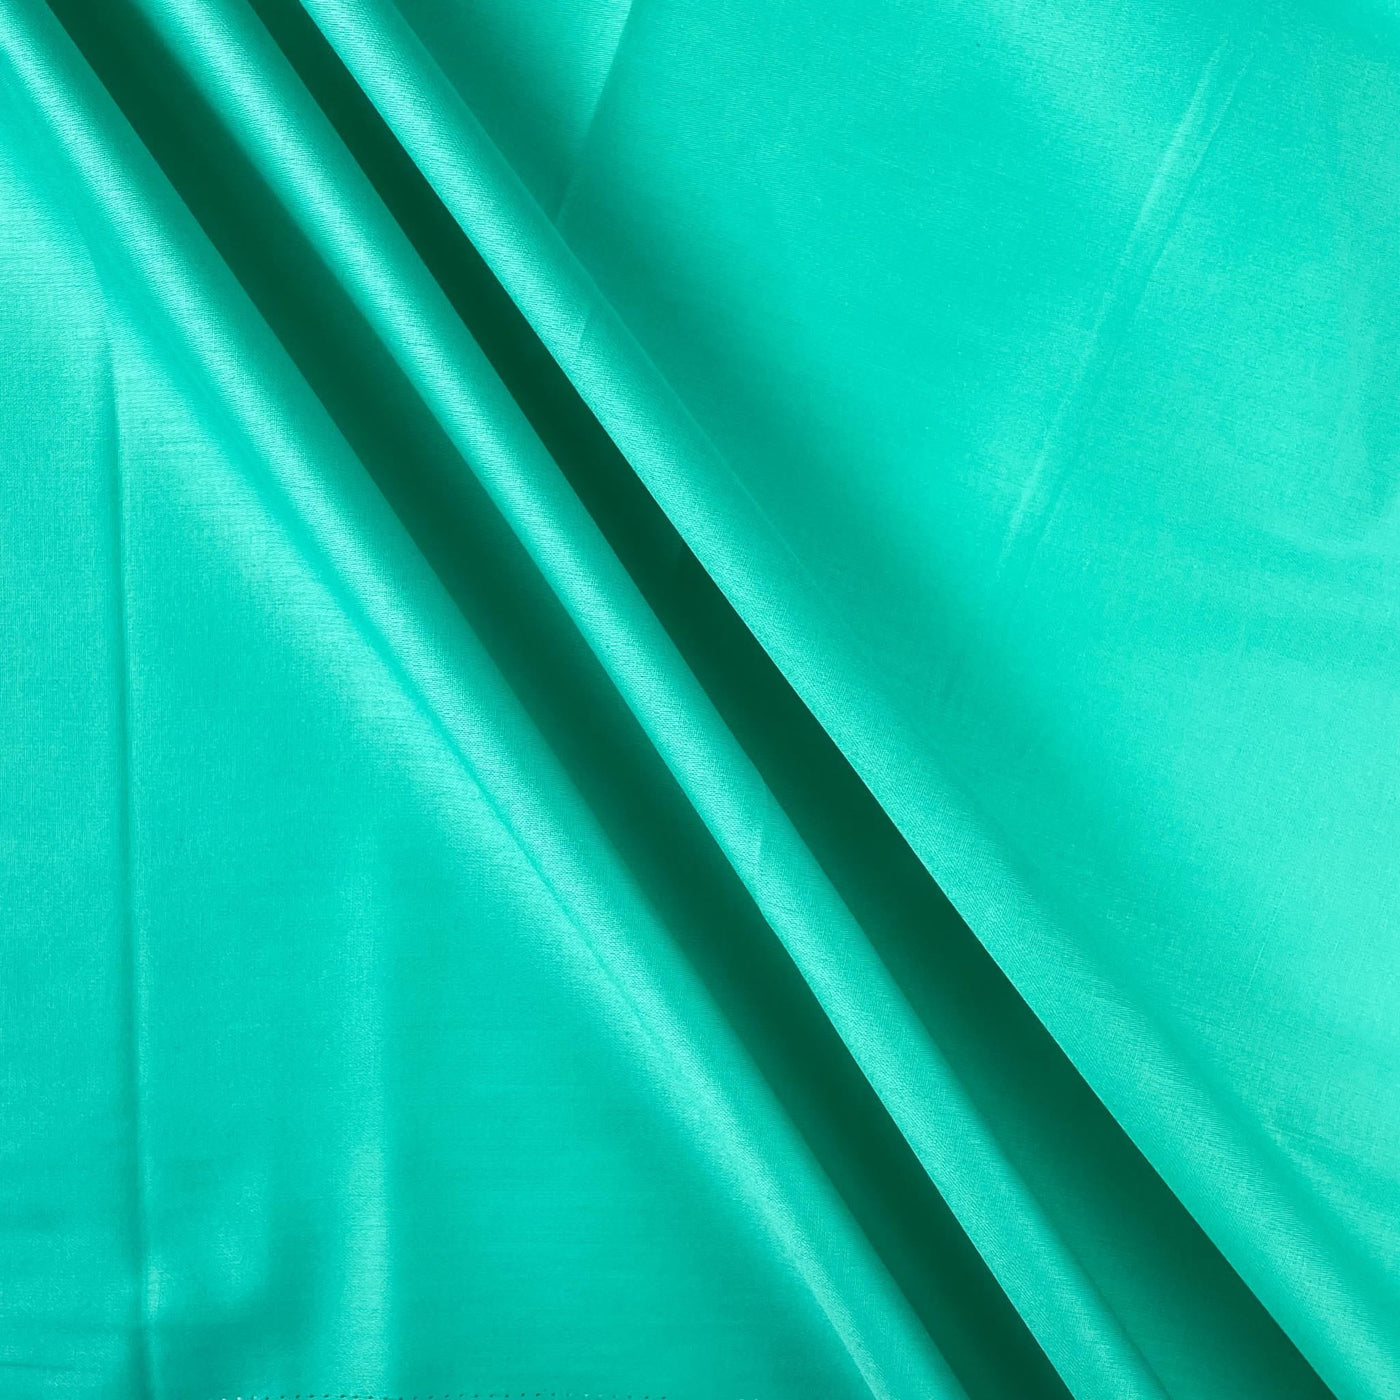 Fabric Pandit Fabric Bright Turquoise Plain Cotton Satin Fabric (Width 42 Inches)